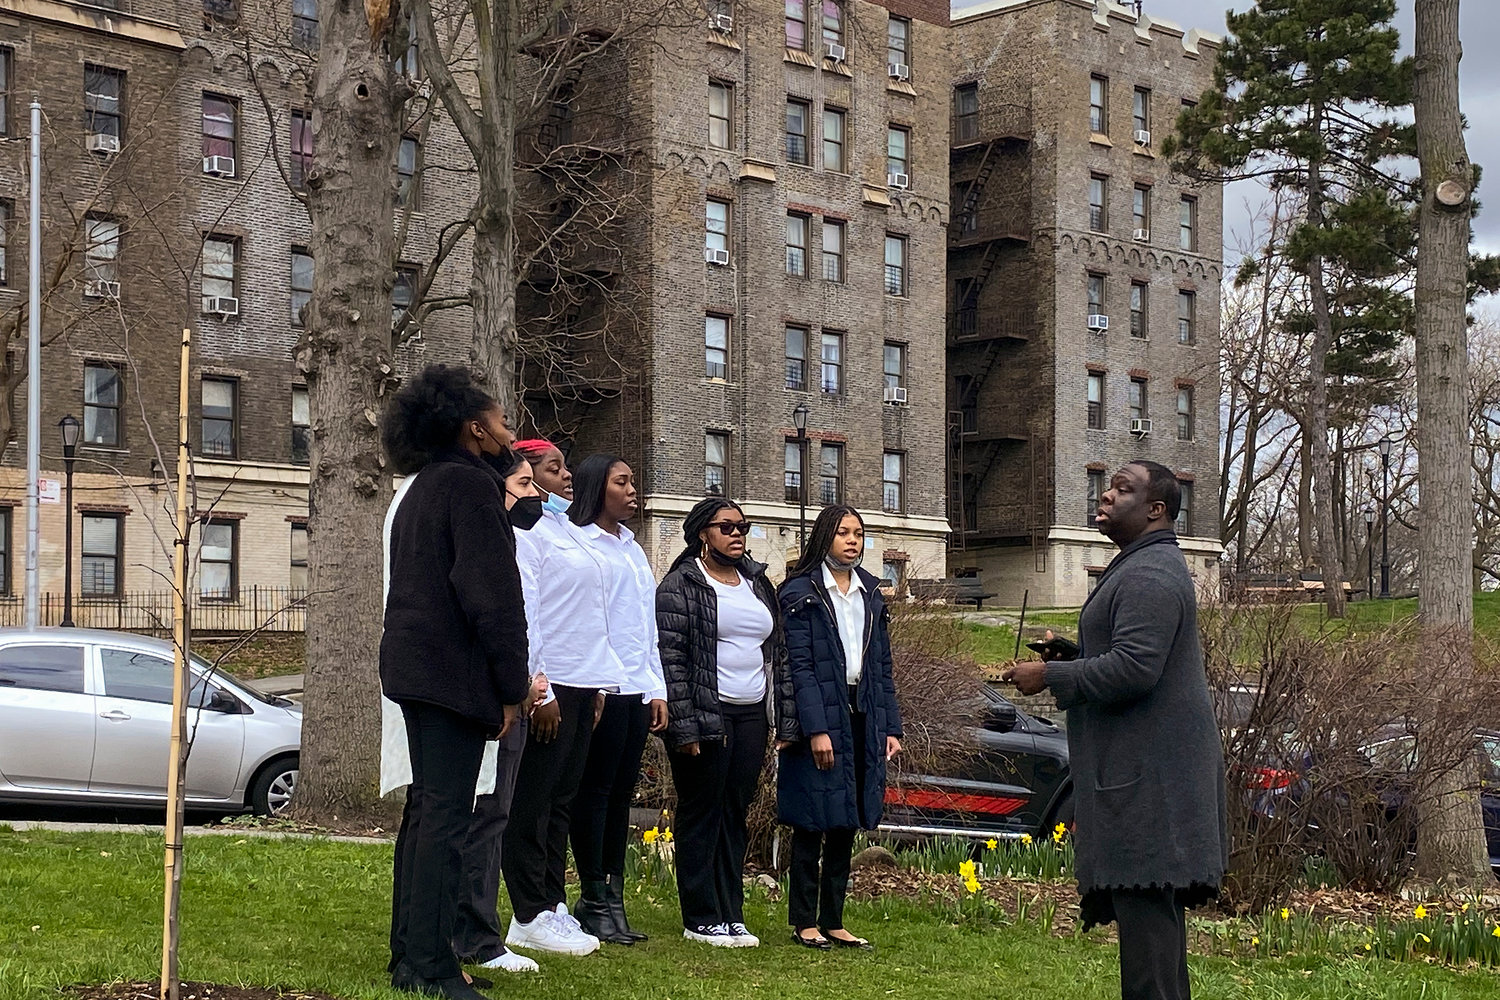 Celia Cruz Bronx High School of Music choir director Justin Kelly leads the school’s choir during a recent ceremony commemorating the blessing of three rosebud trees planted in the memory of New York City residents who died during COVID-19. The ceremony took place in a park at the corner of University and Reservoir avenues in Kingsbridge Heights.